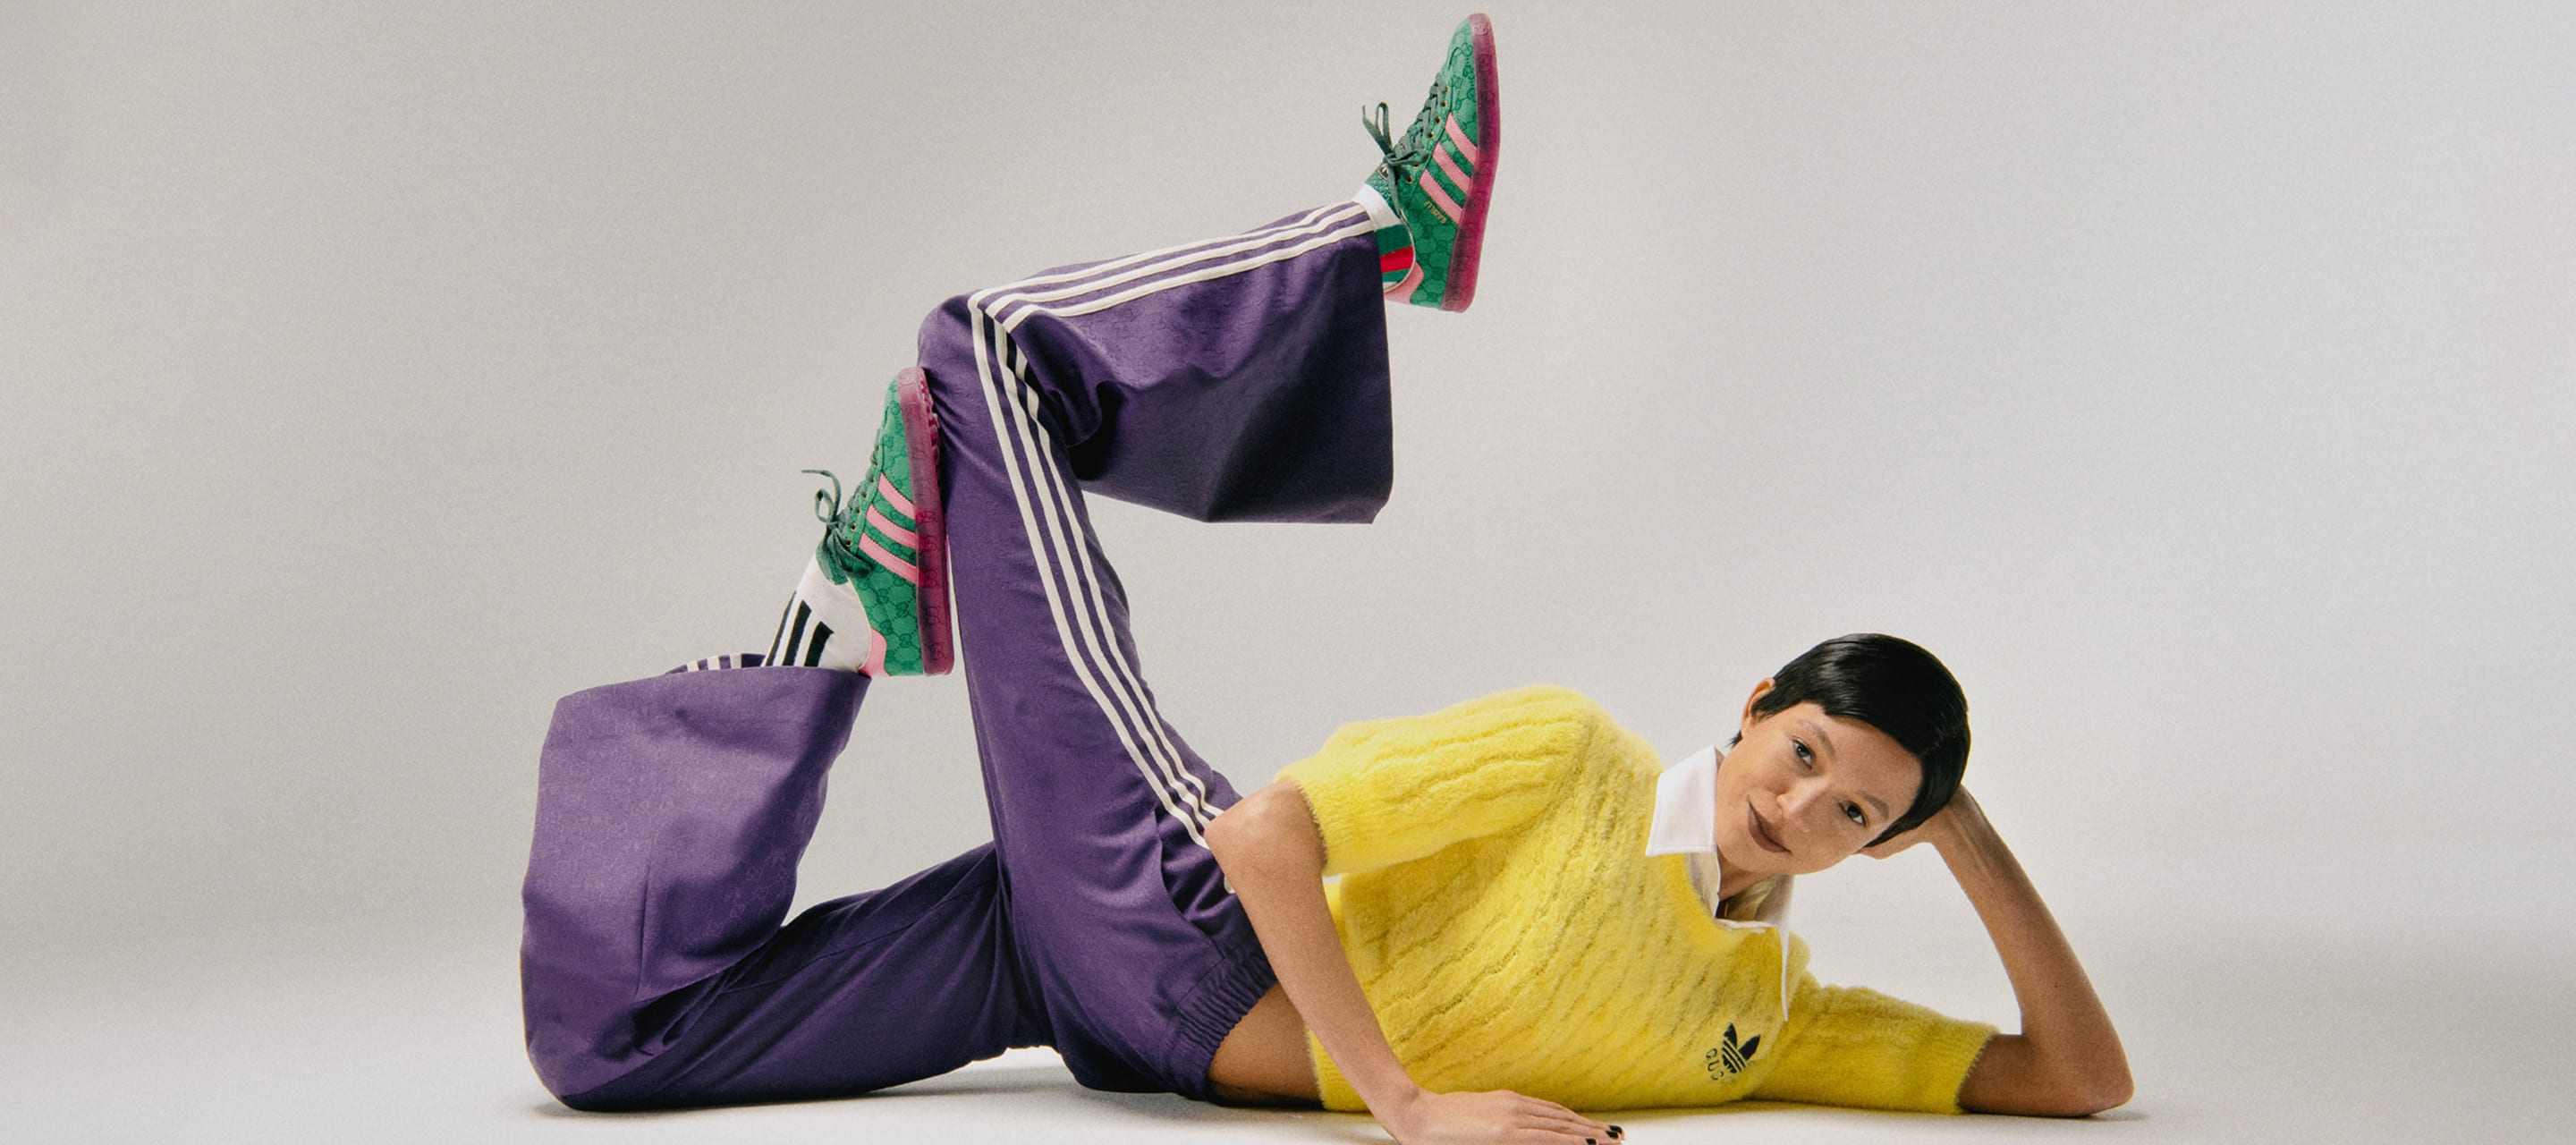 Models wear the adidas x Gucci collection in campaign images.